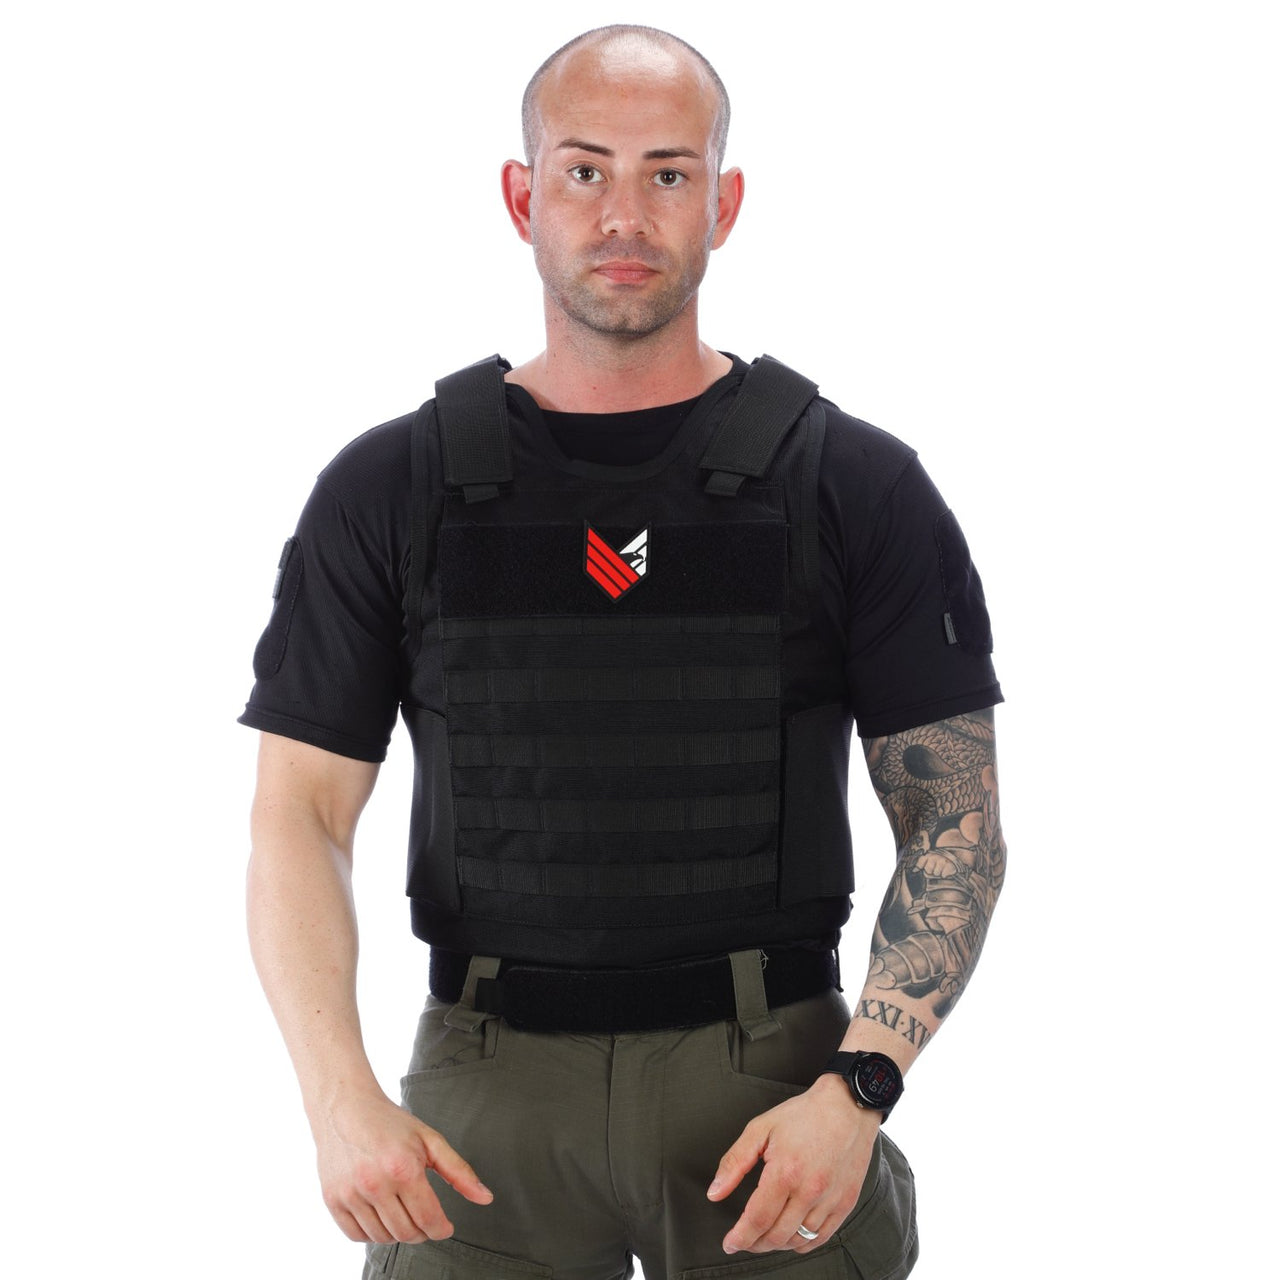 A man wearing a Body Armor Direct All Star Tactical Enhanced Multi-Threat Vest on a white background.